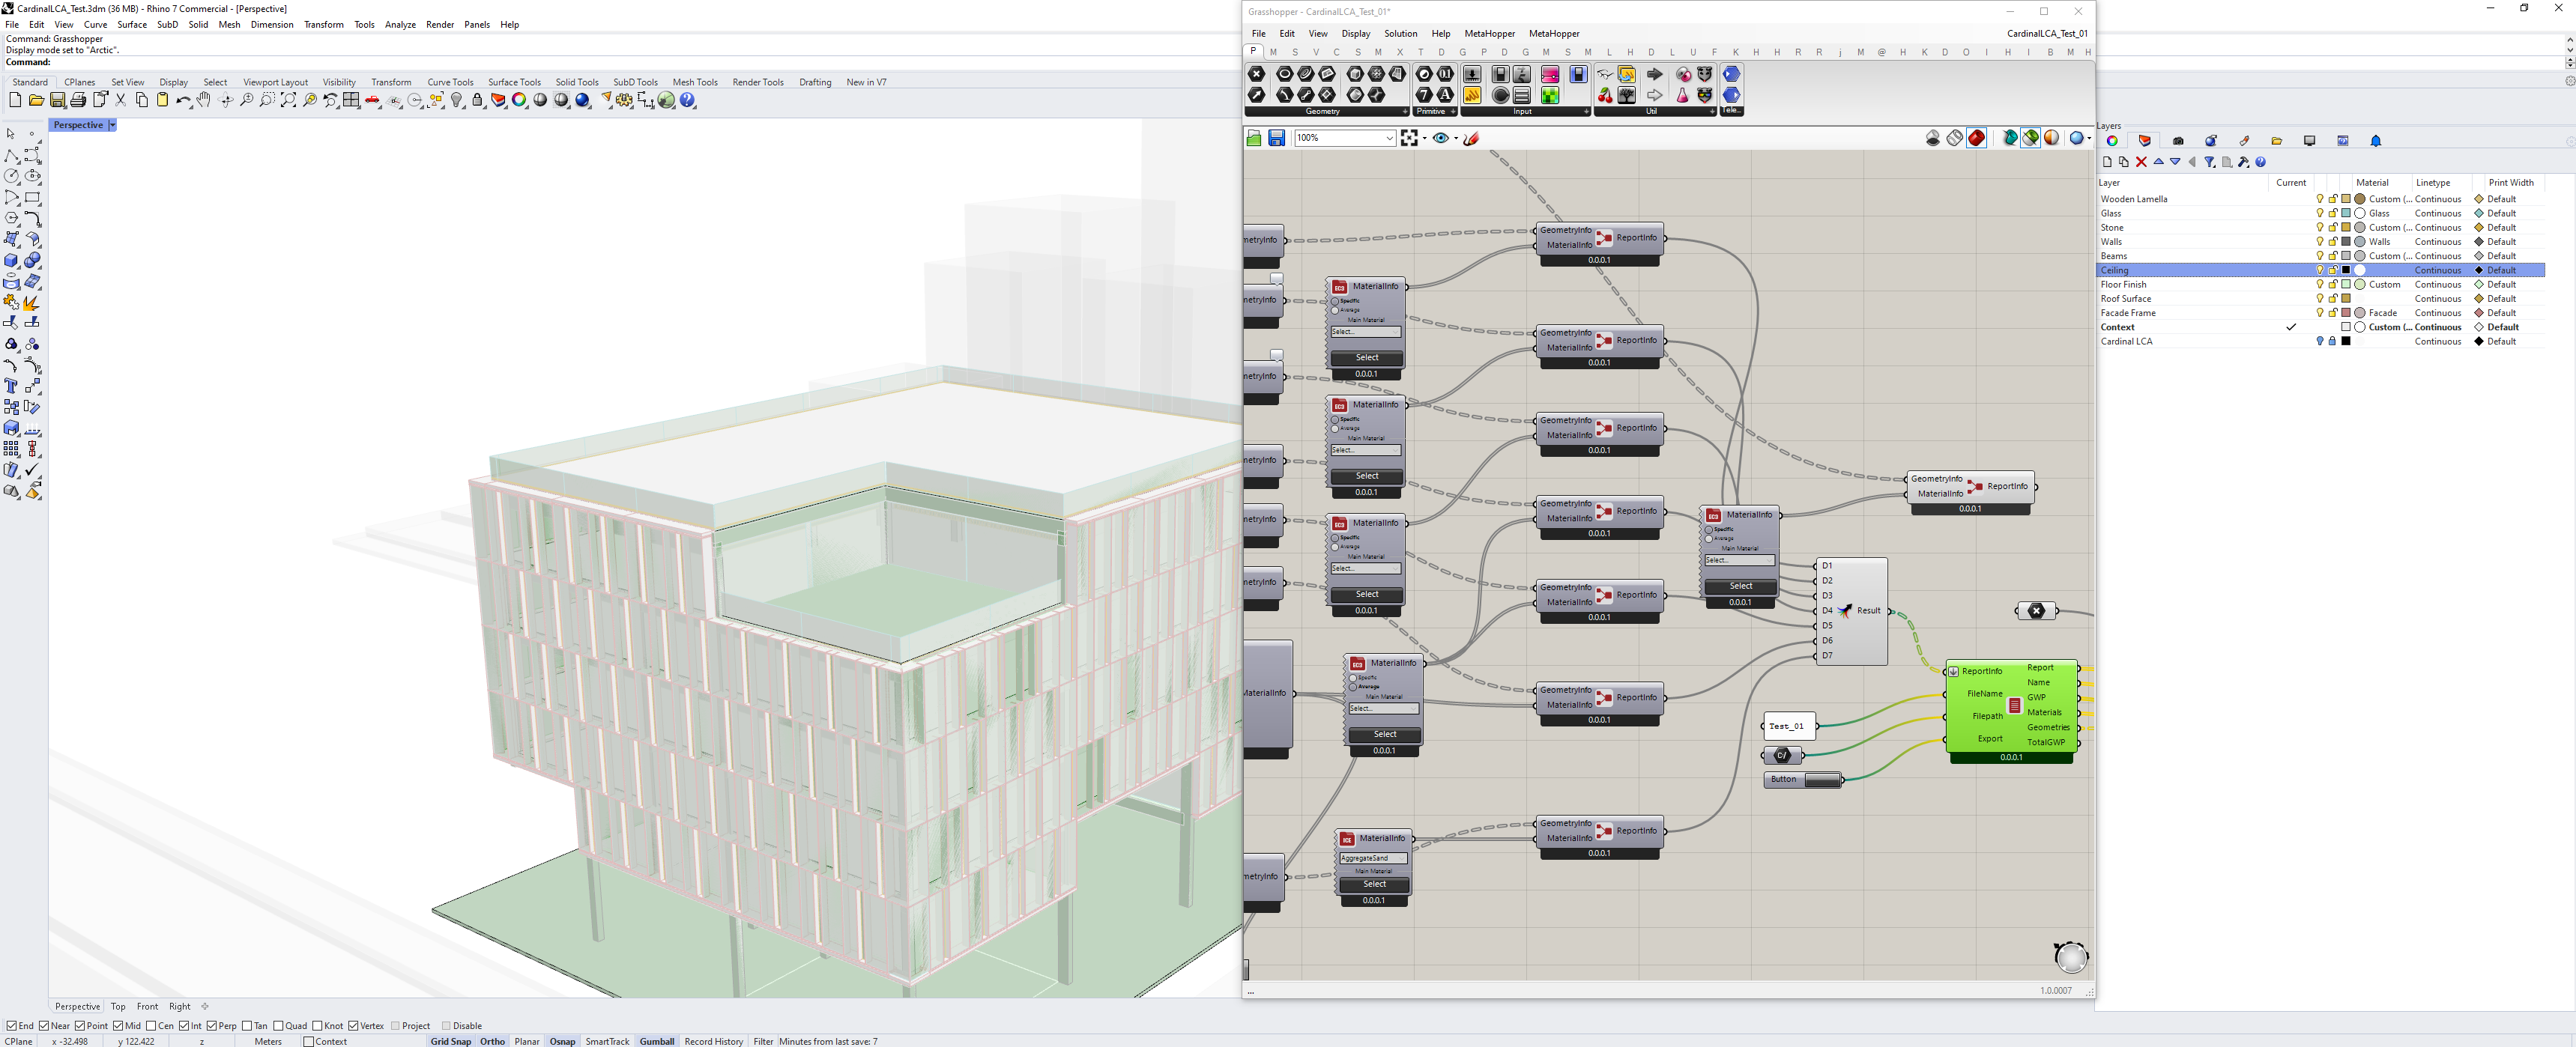 Screenshot from the plugin showing a rendering and systems analysis.